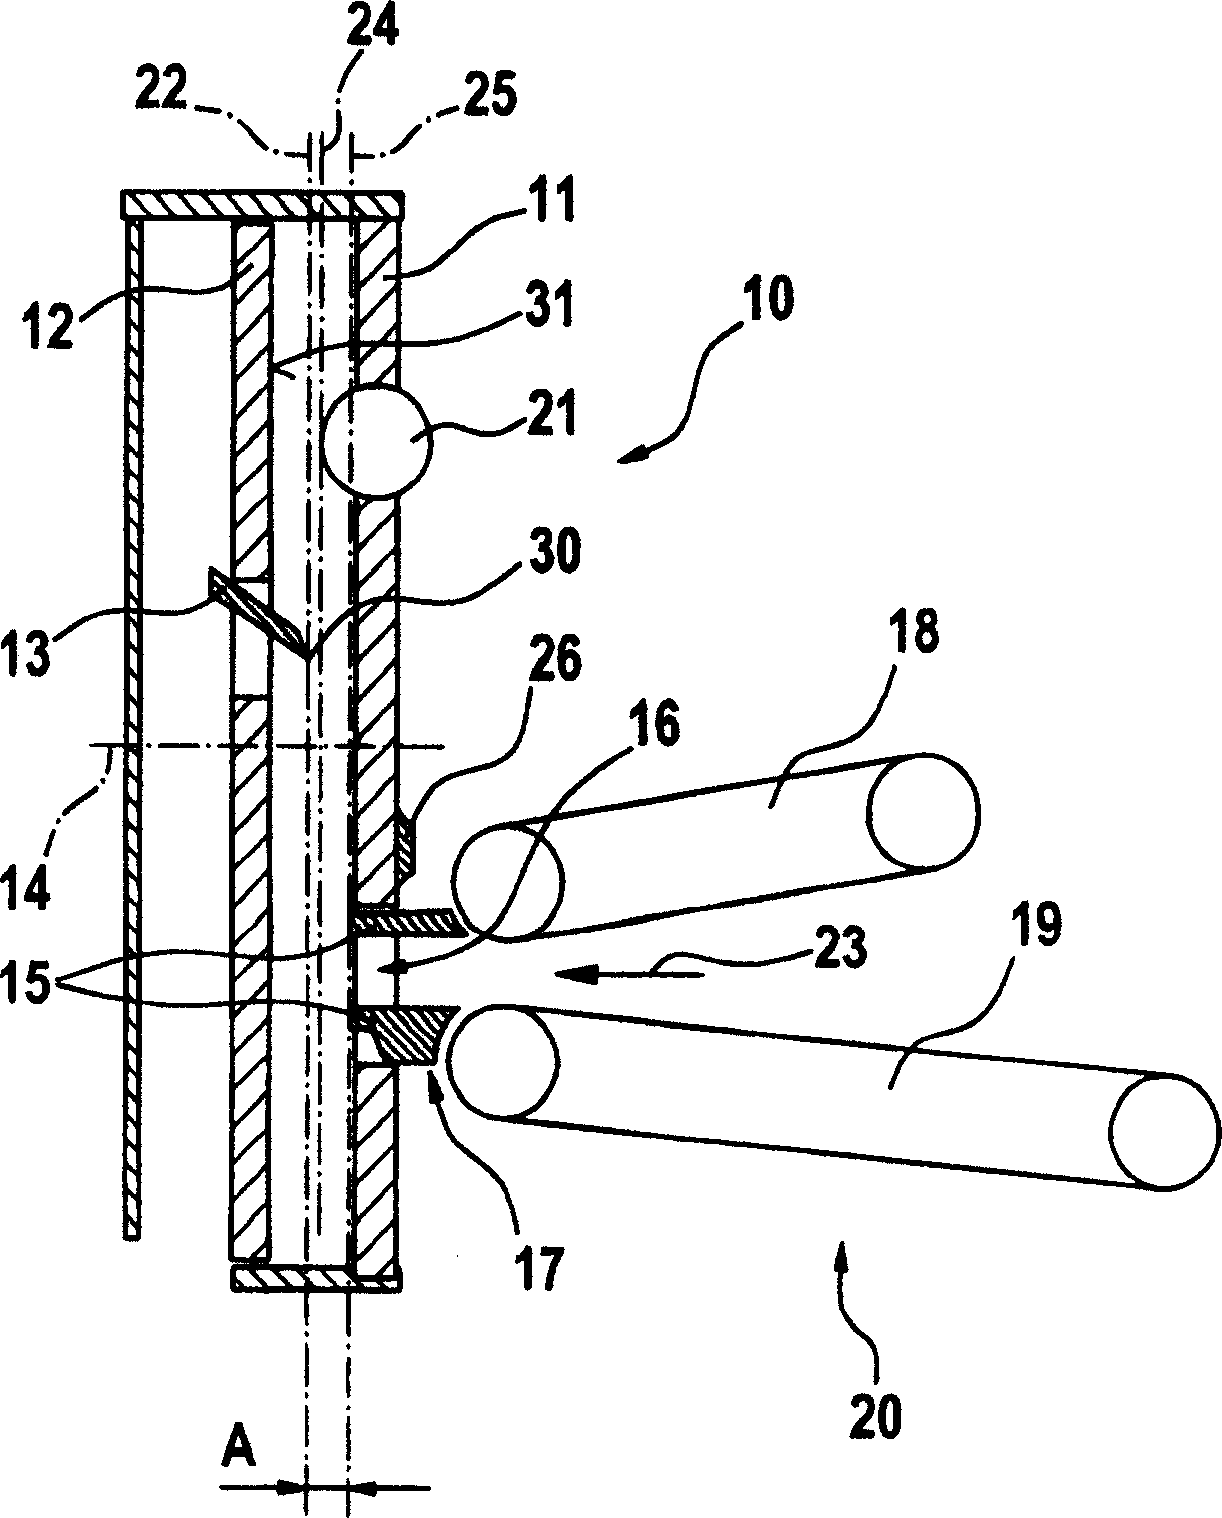 Device and method for cutting tobacco from a tobacco bale